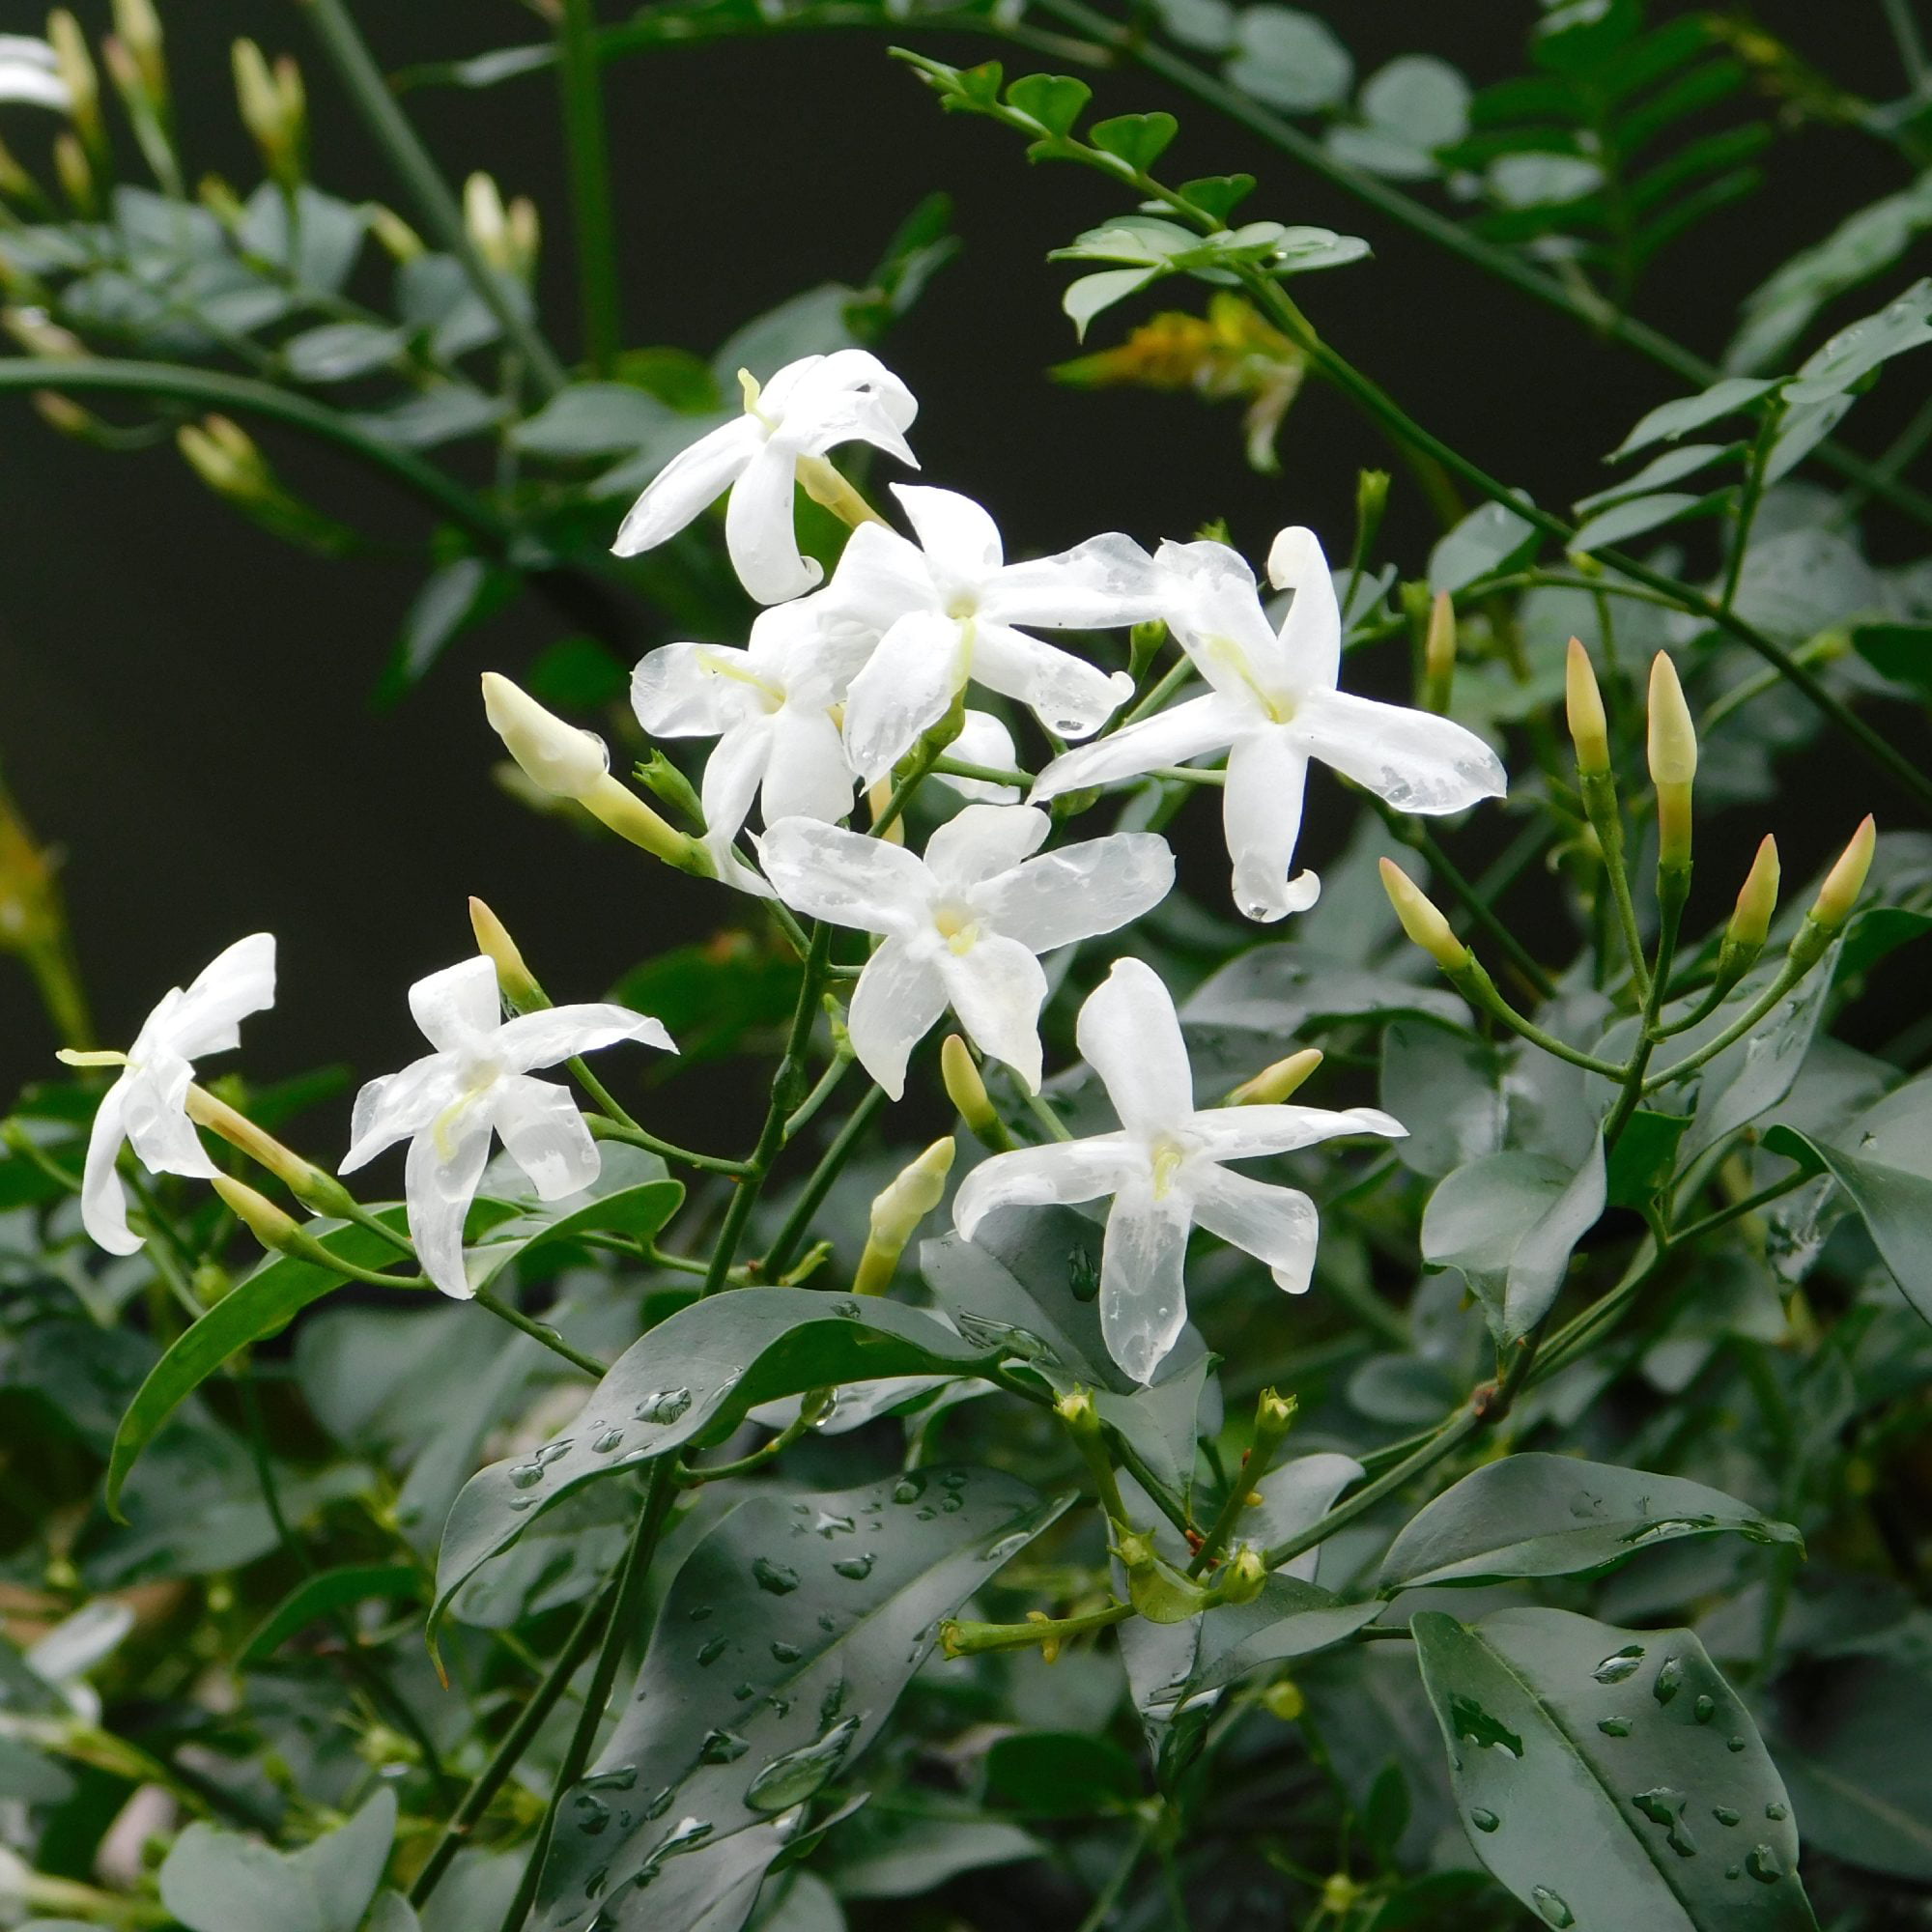 Jasmine Flower Whole (jasminum officinale) – Glenbrook Farms Herbs and Such